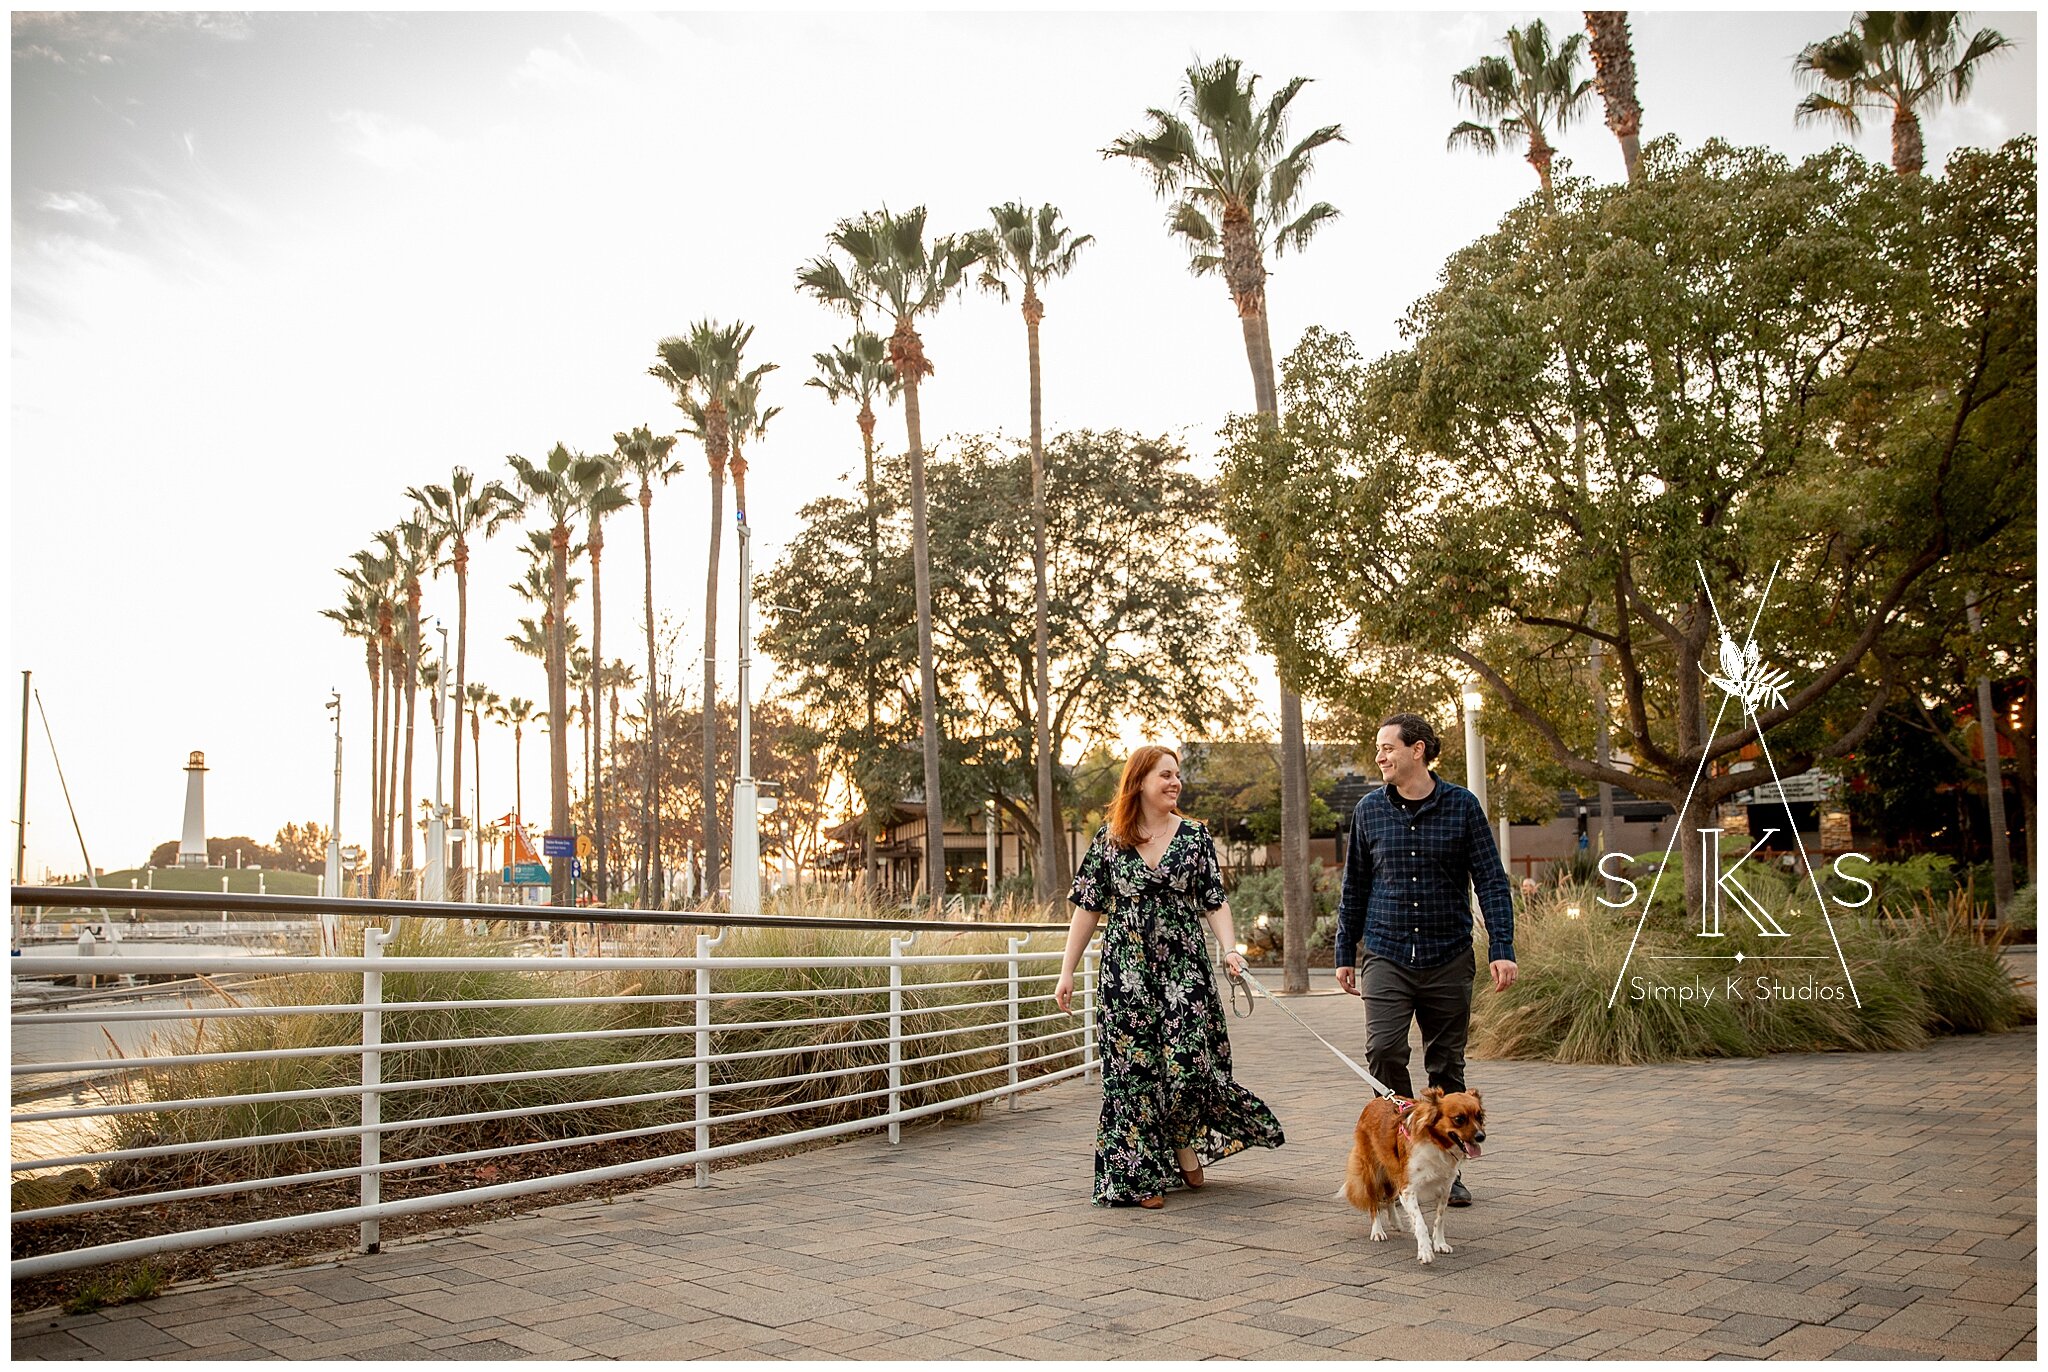  A man and woman walking their dog in front of palm trees 